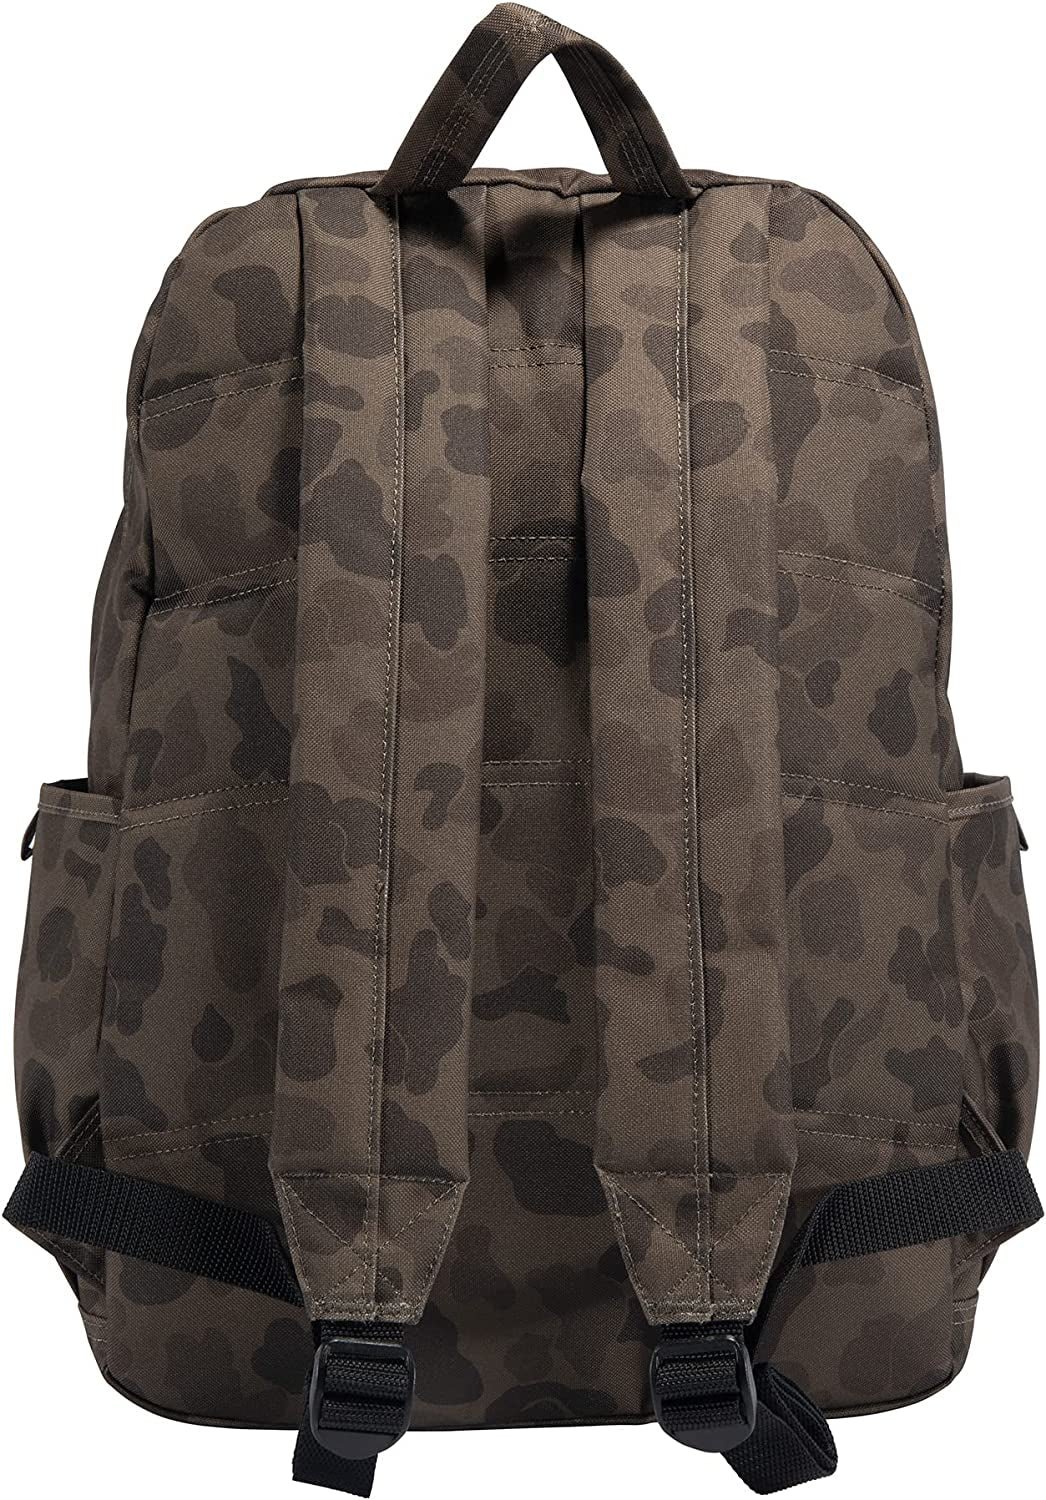 25L Classic Backpack, Durable Water-Resistant Pack with Laptop Sleeve, Duck Camo, One Size